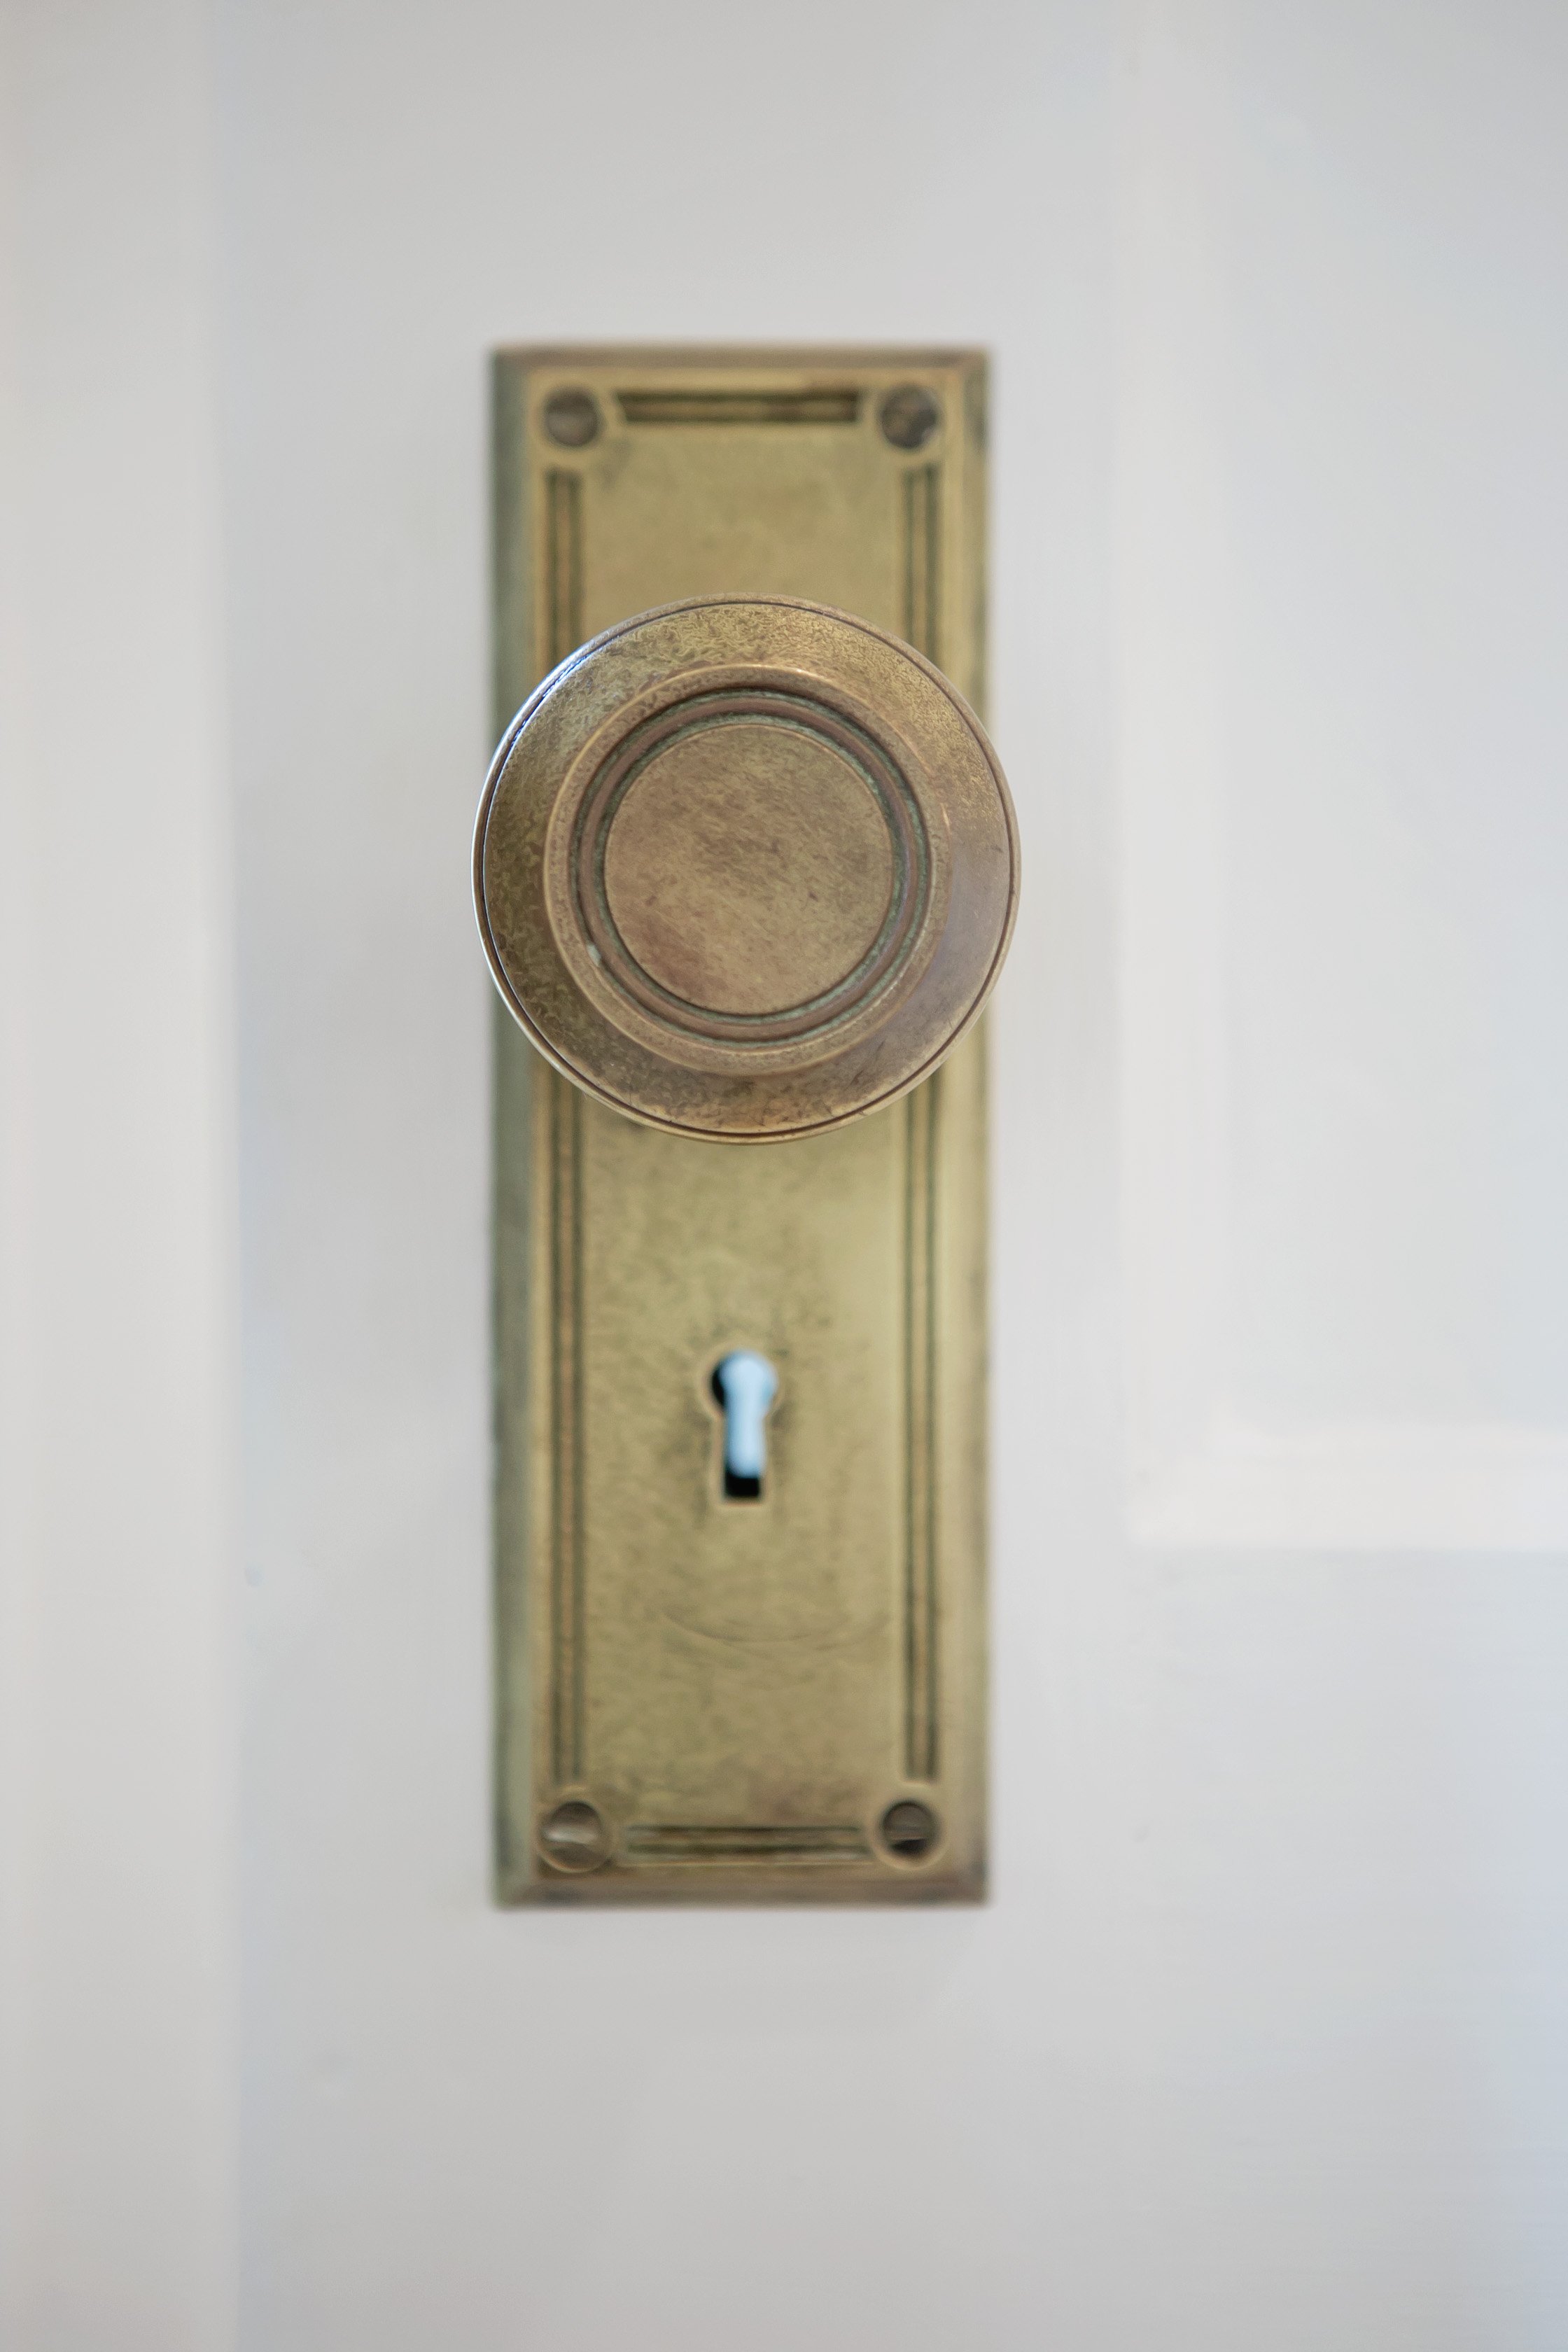 Gold Antique Door Knob in Southern Bathroom_Pool Brothers_South Georgia.jpg